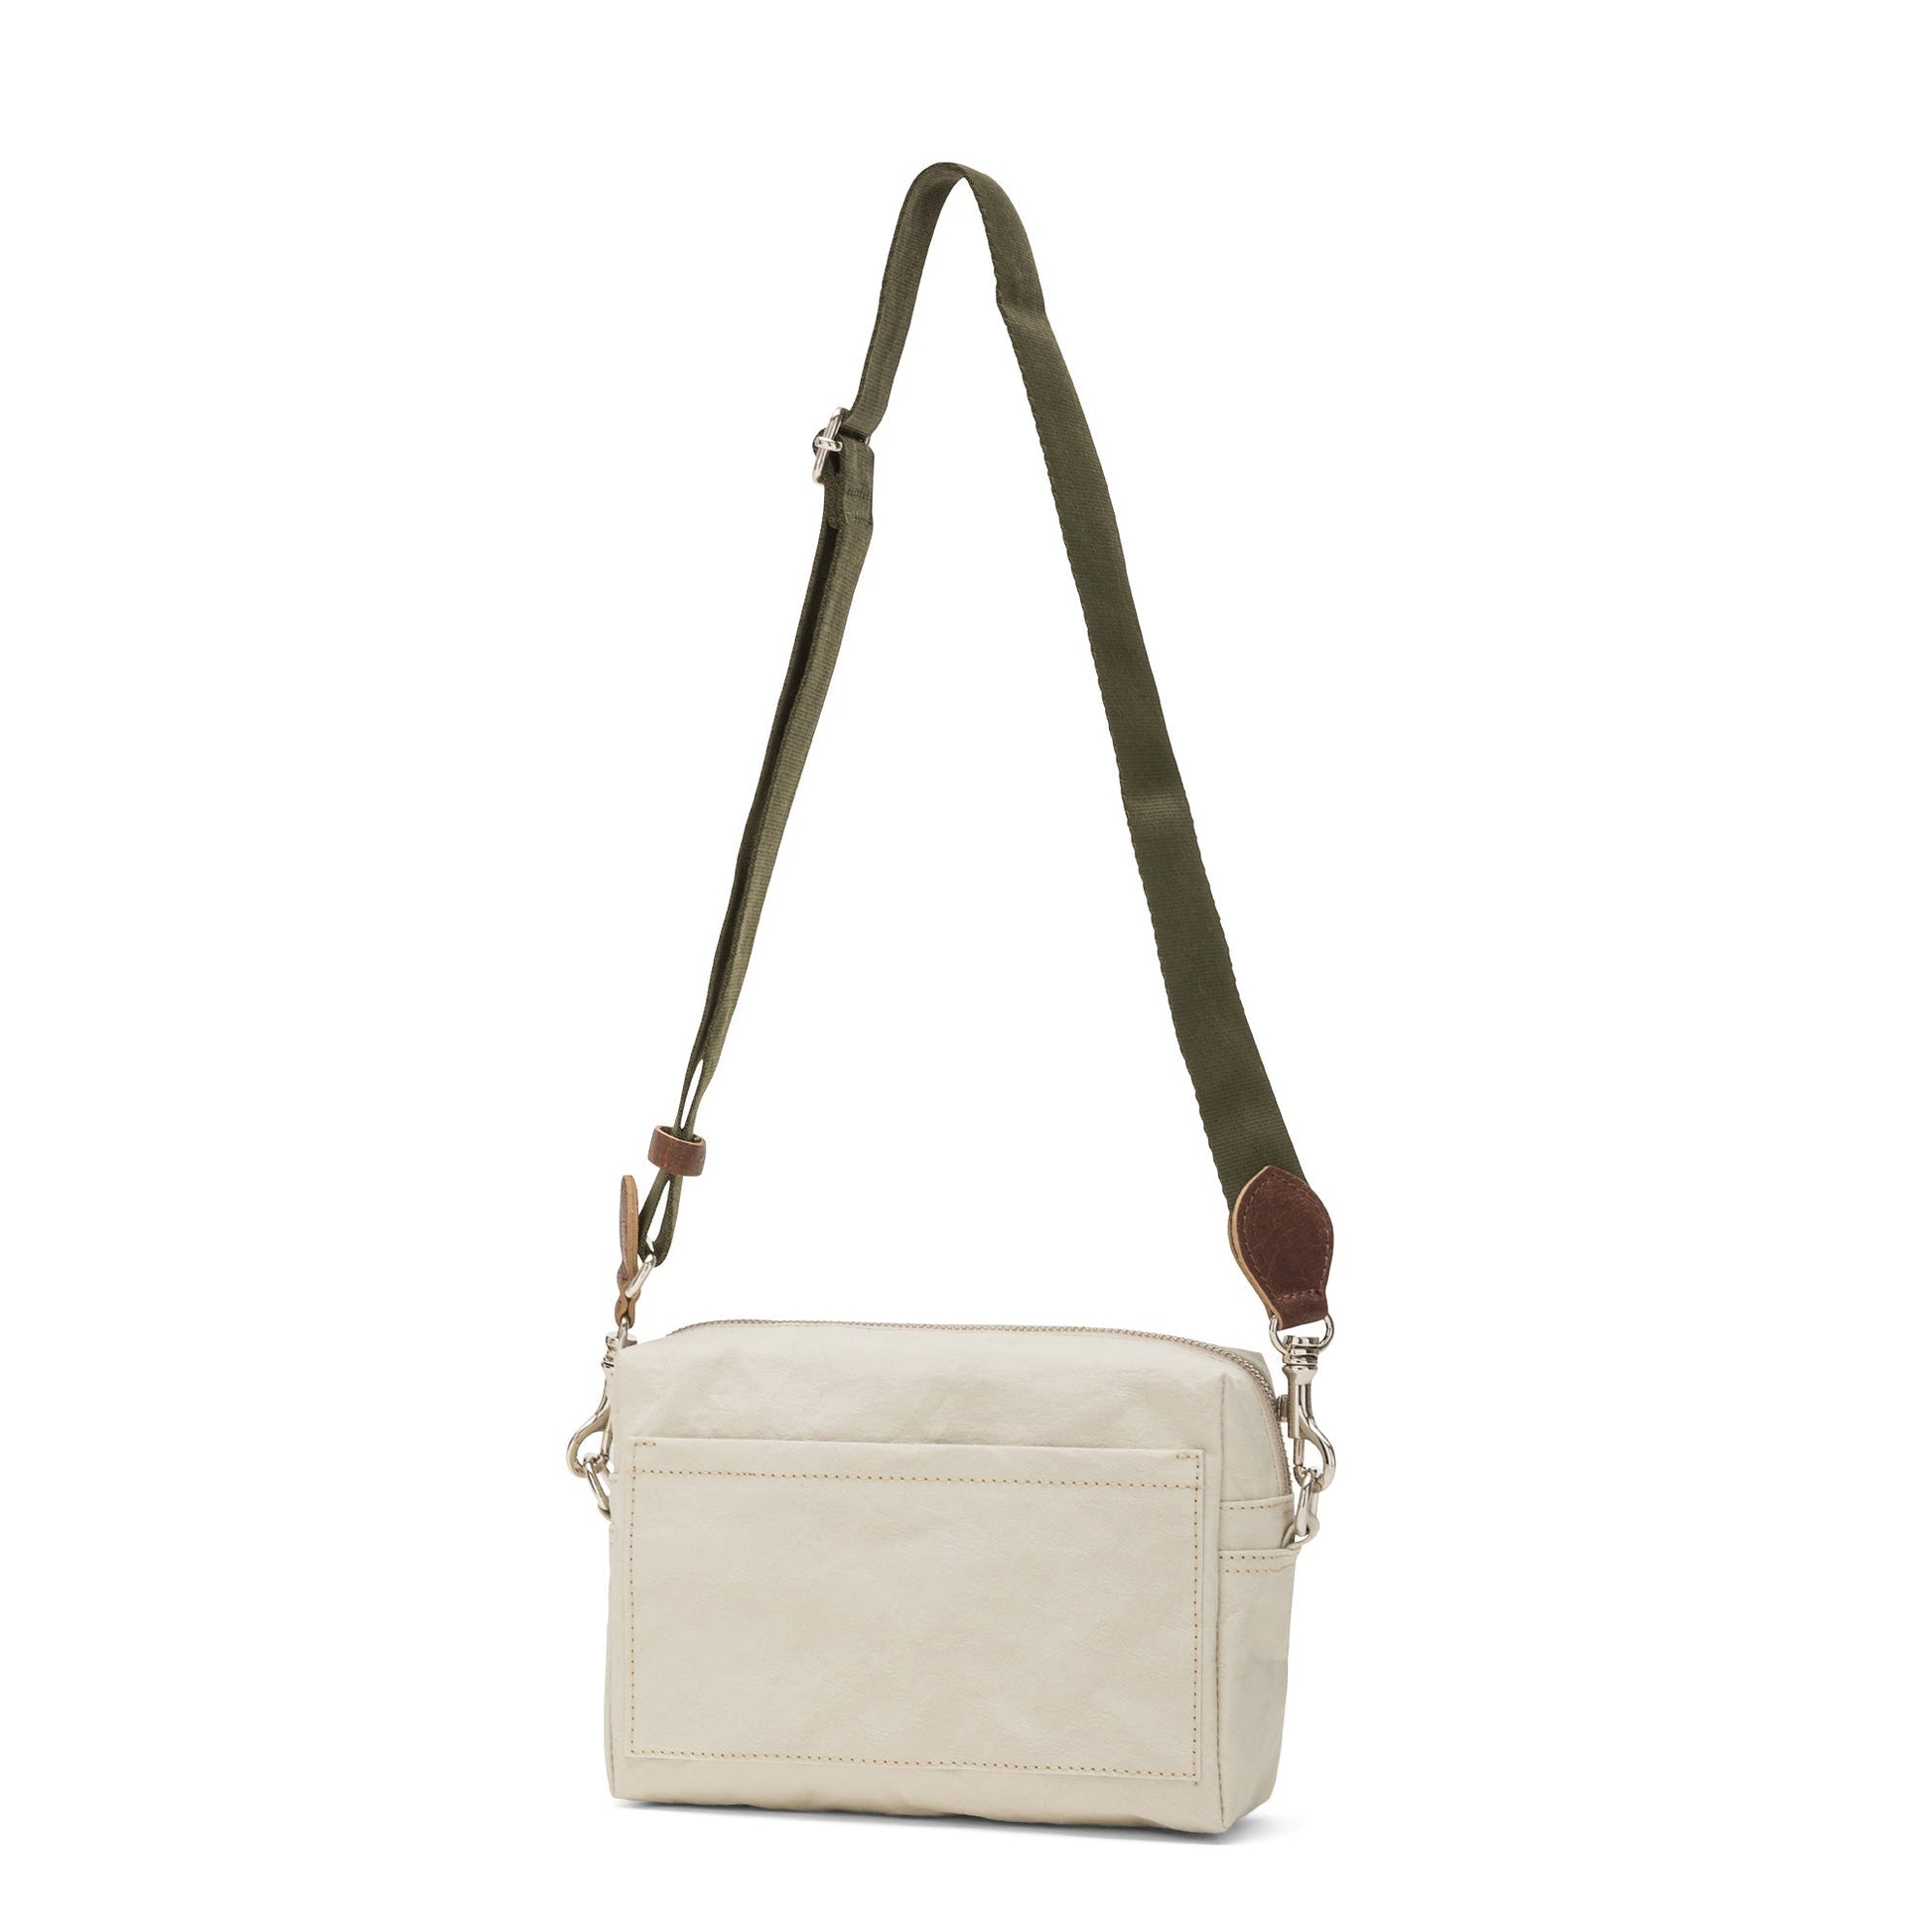 A rectangular washable paper handbag with an external side pocket is shown. The bag has a canvas strap, washable paper details and metal fastening clips to attach the straps to the bag. The bag closes by a zip. The bag shown is light cream with an olive strap.